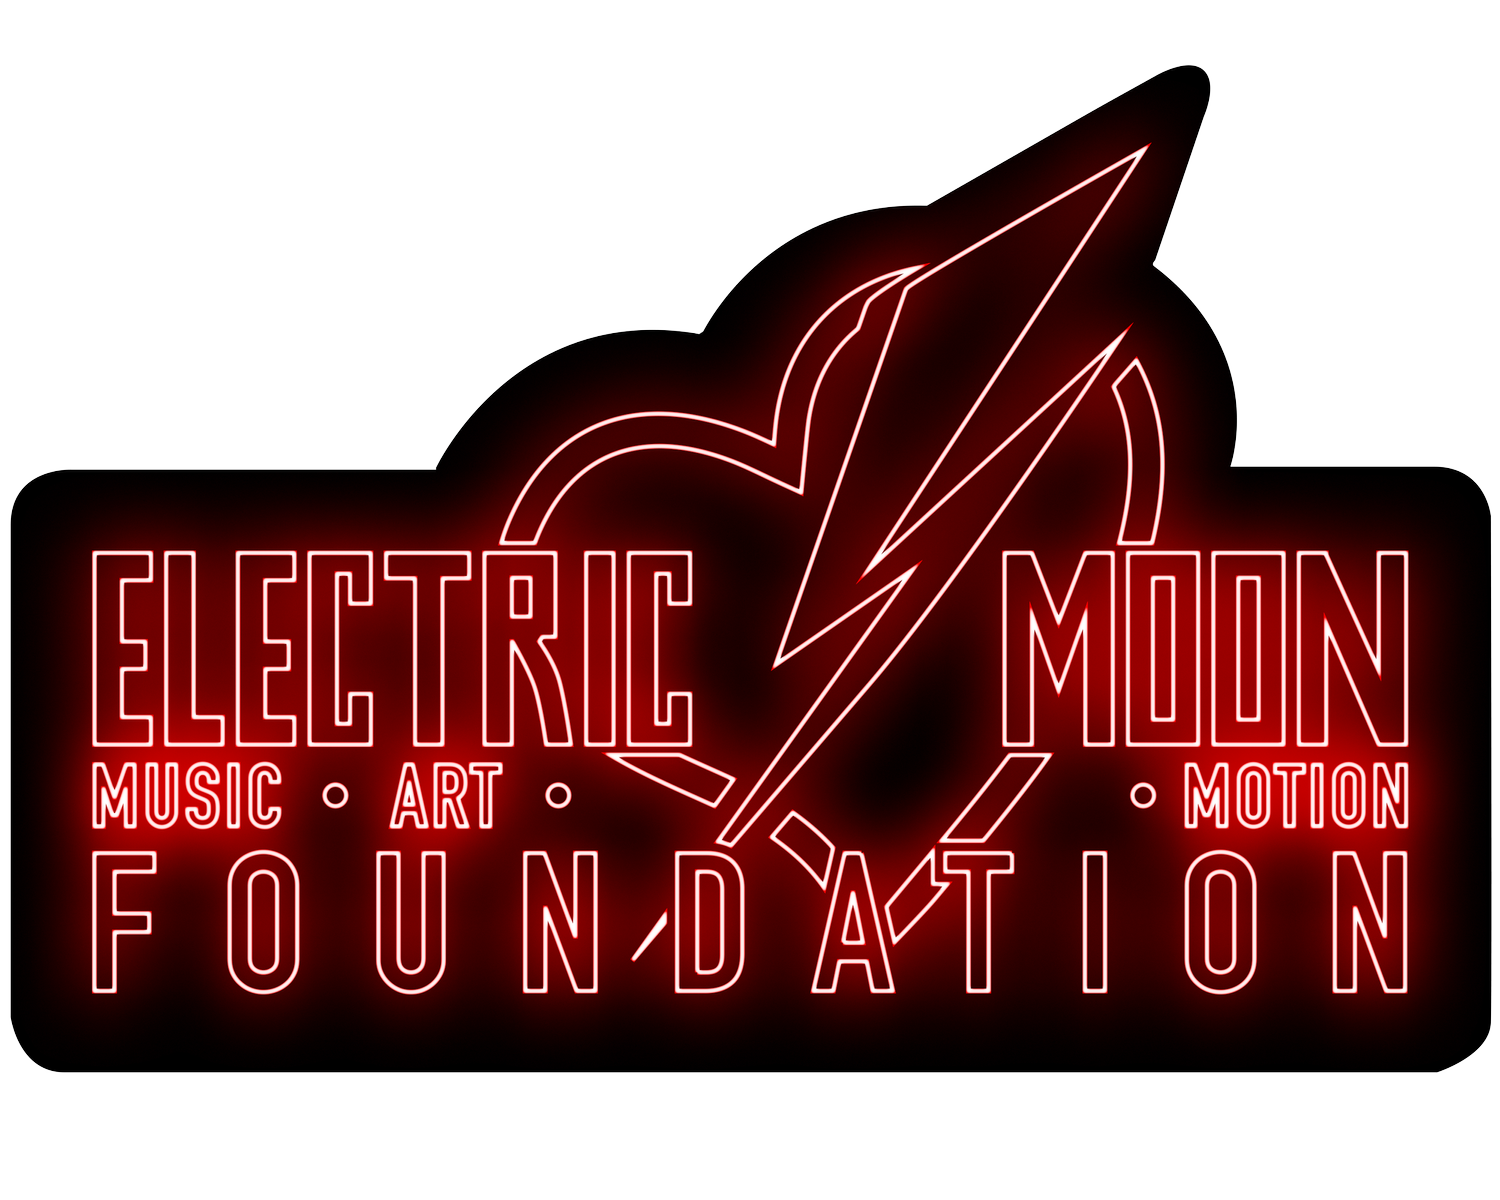 Electric Moon Foundation